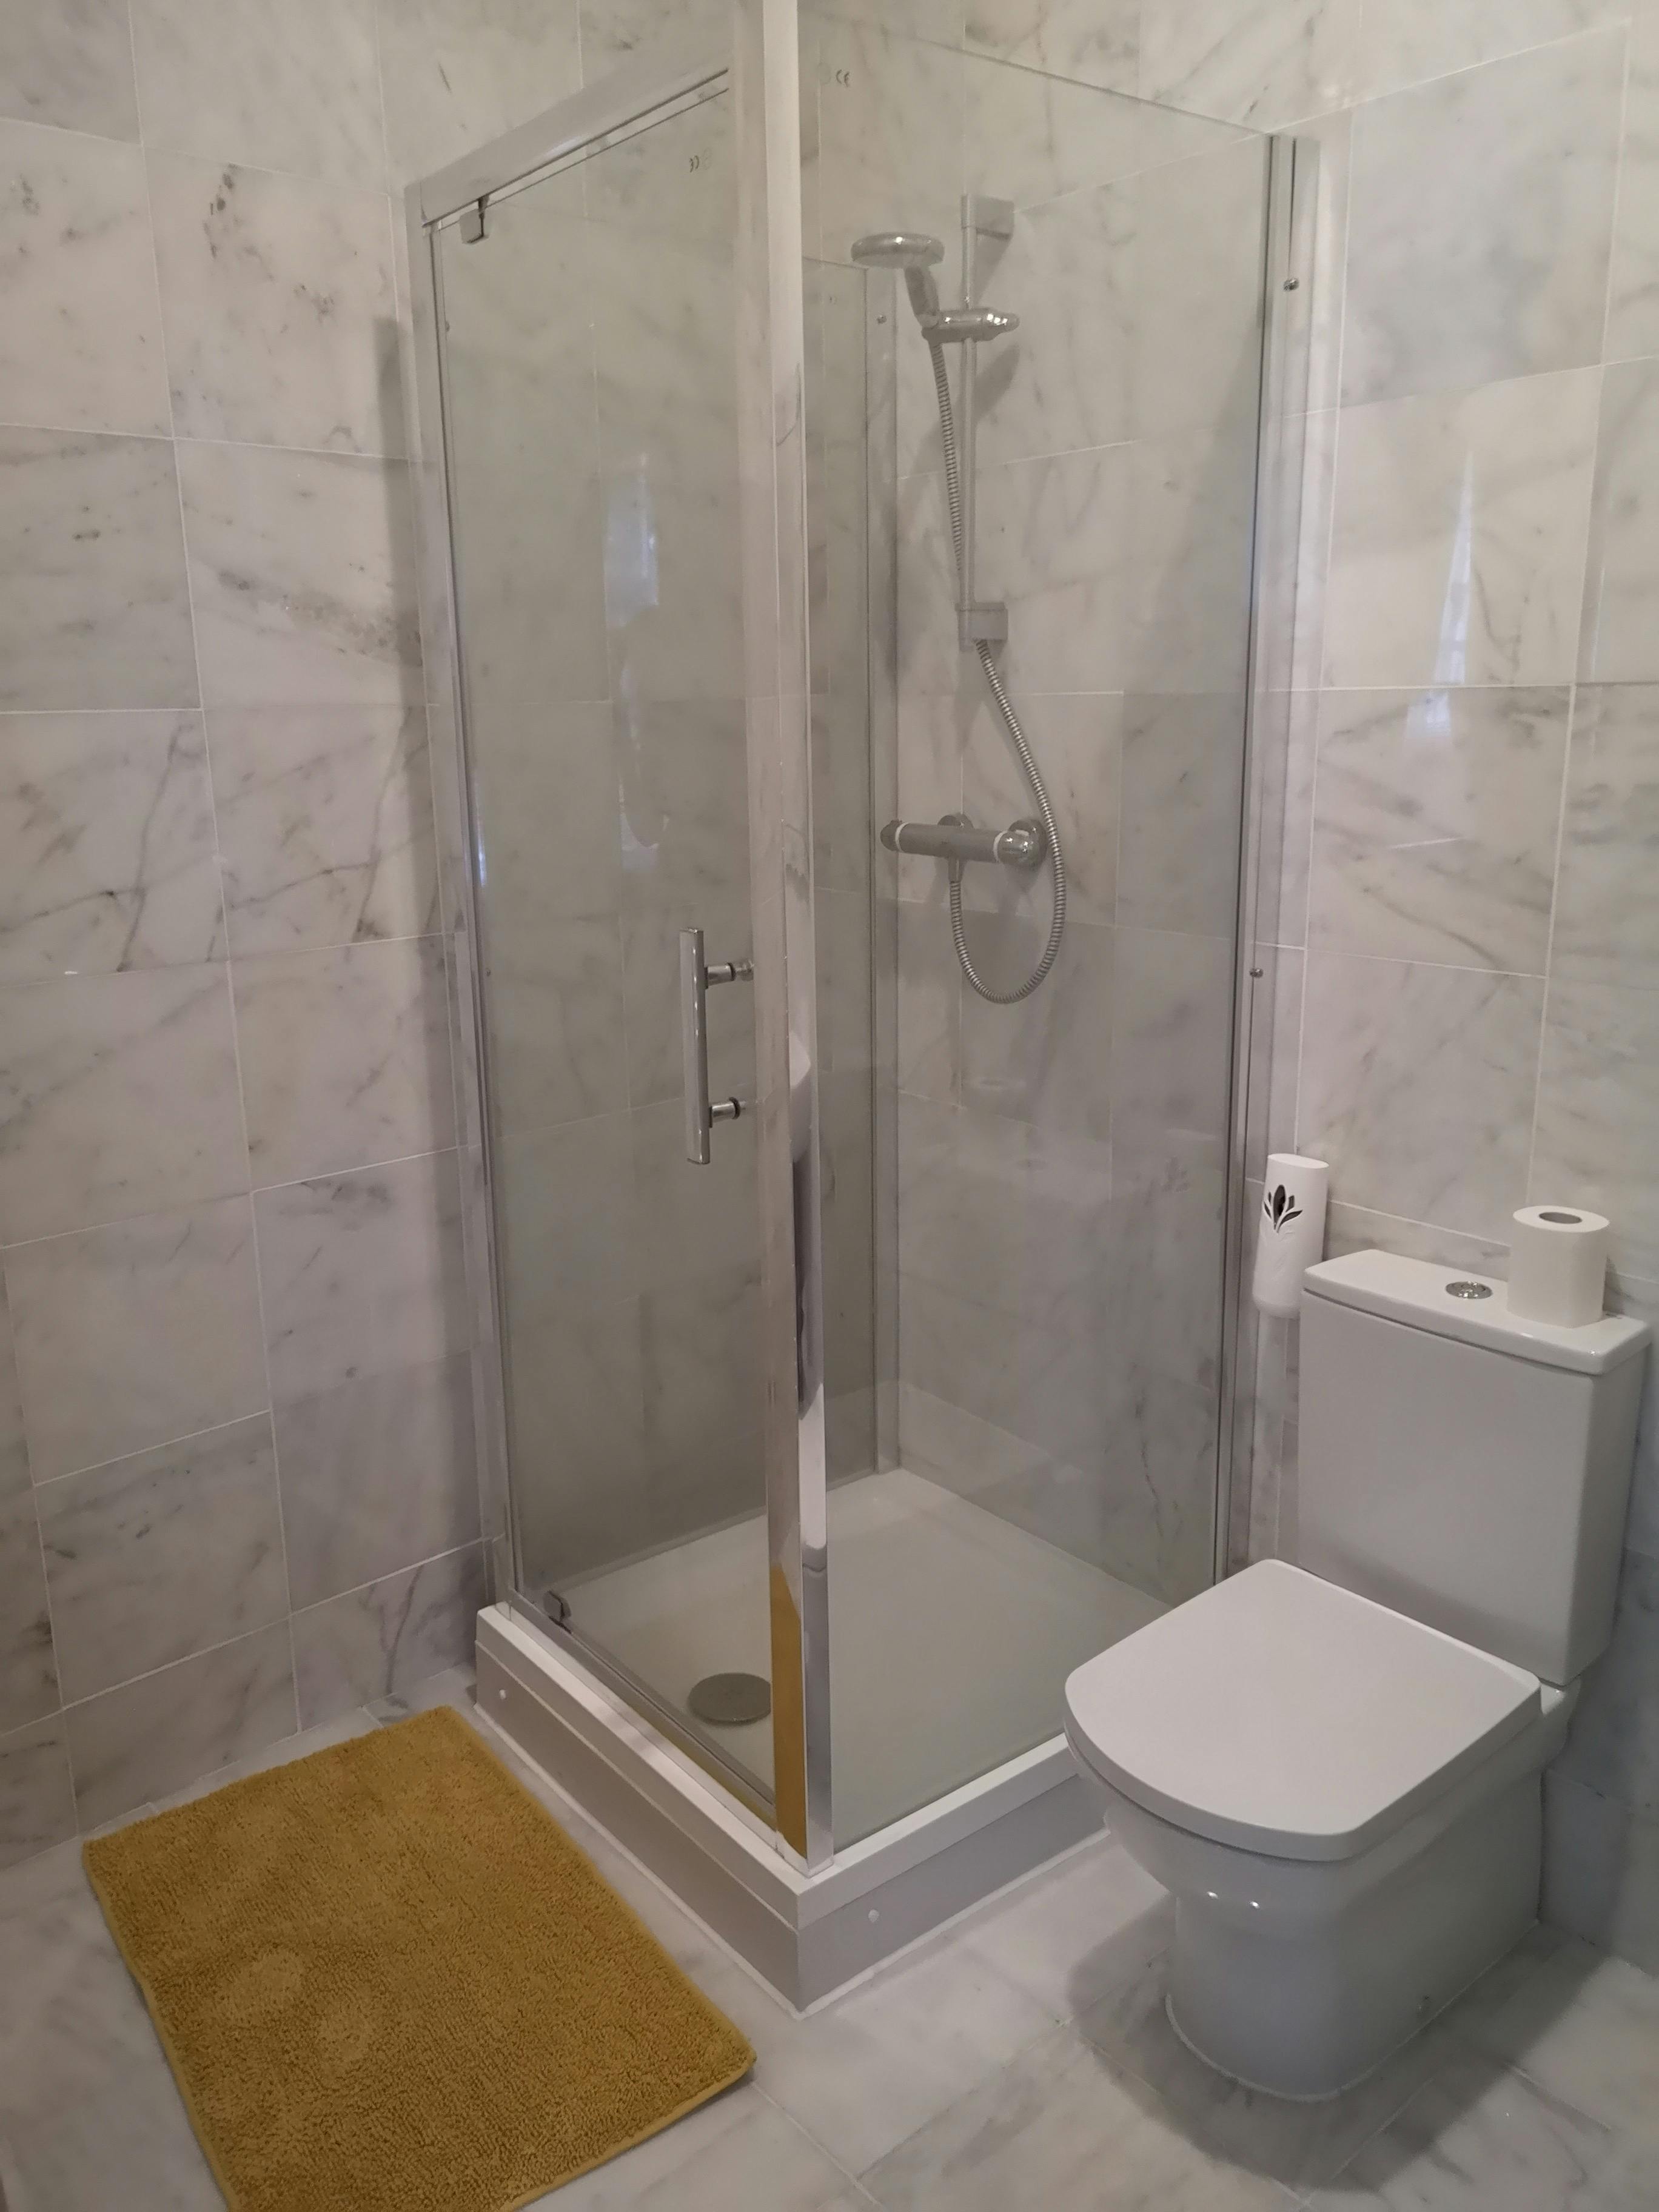 Shower room to twin room in private bathroom